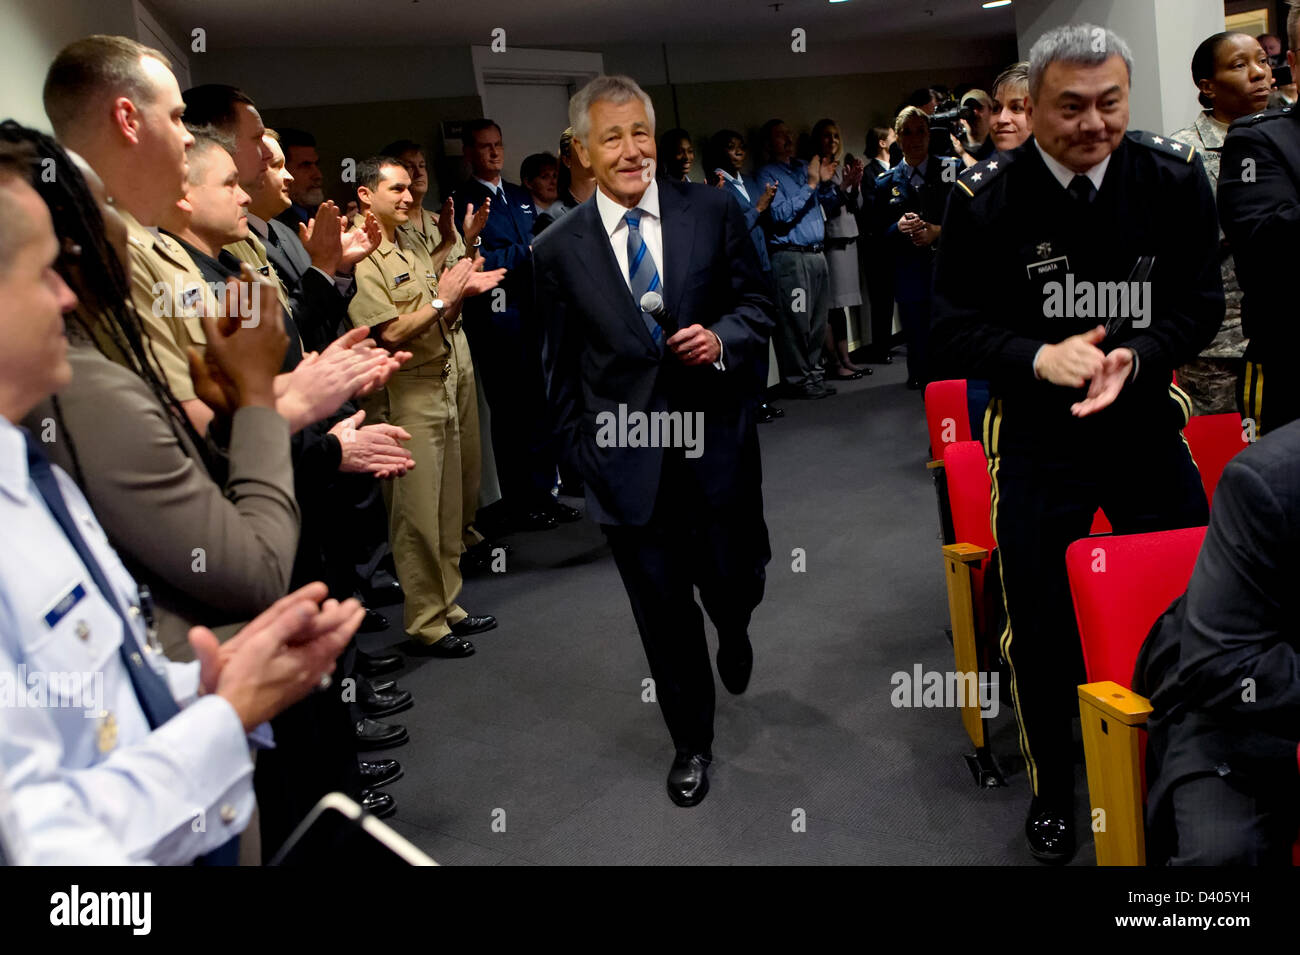 New Defense Secretary Chuck Hagel arrives at the Pentagon Auditorium to address employees and service members during an All Hands Call on Hagel's first day at the Pentagon, Feb. 27, 2013. Hagel earlier took the oath of office to serve as the 24th secretary. Stock Photo